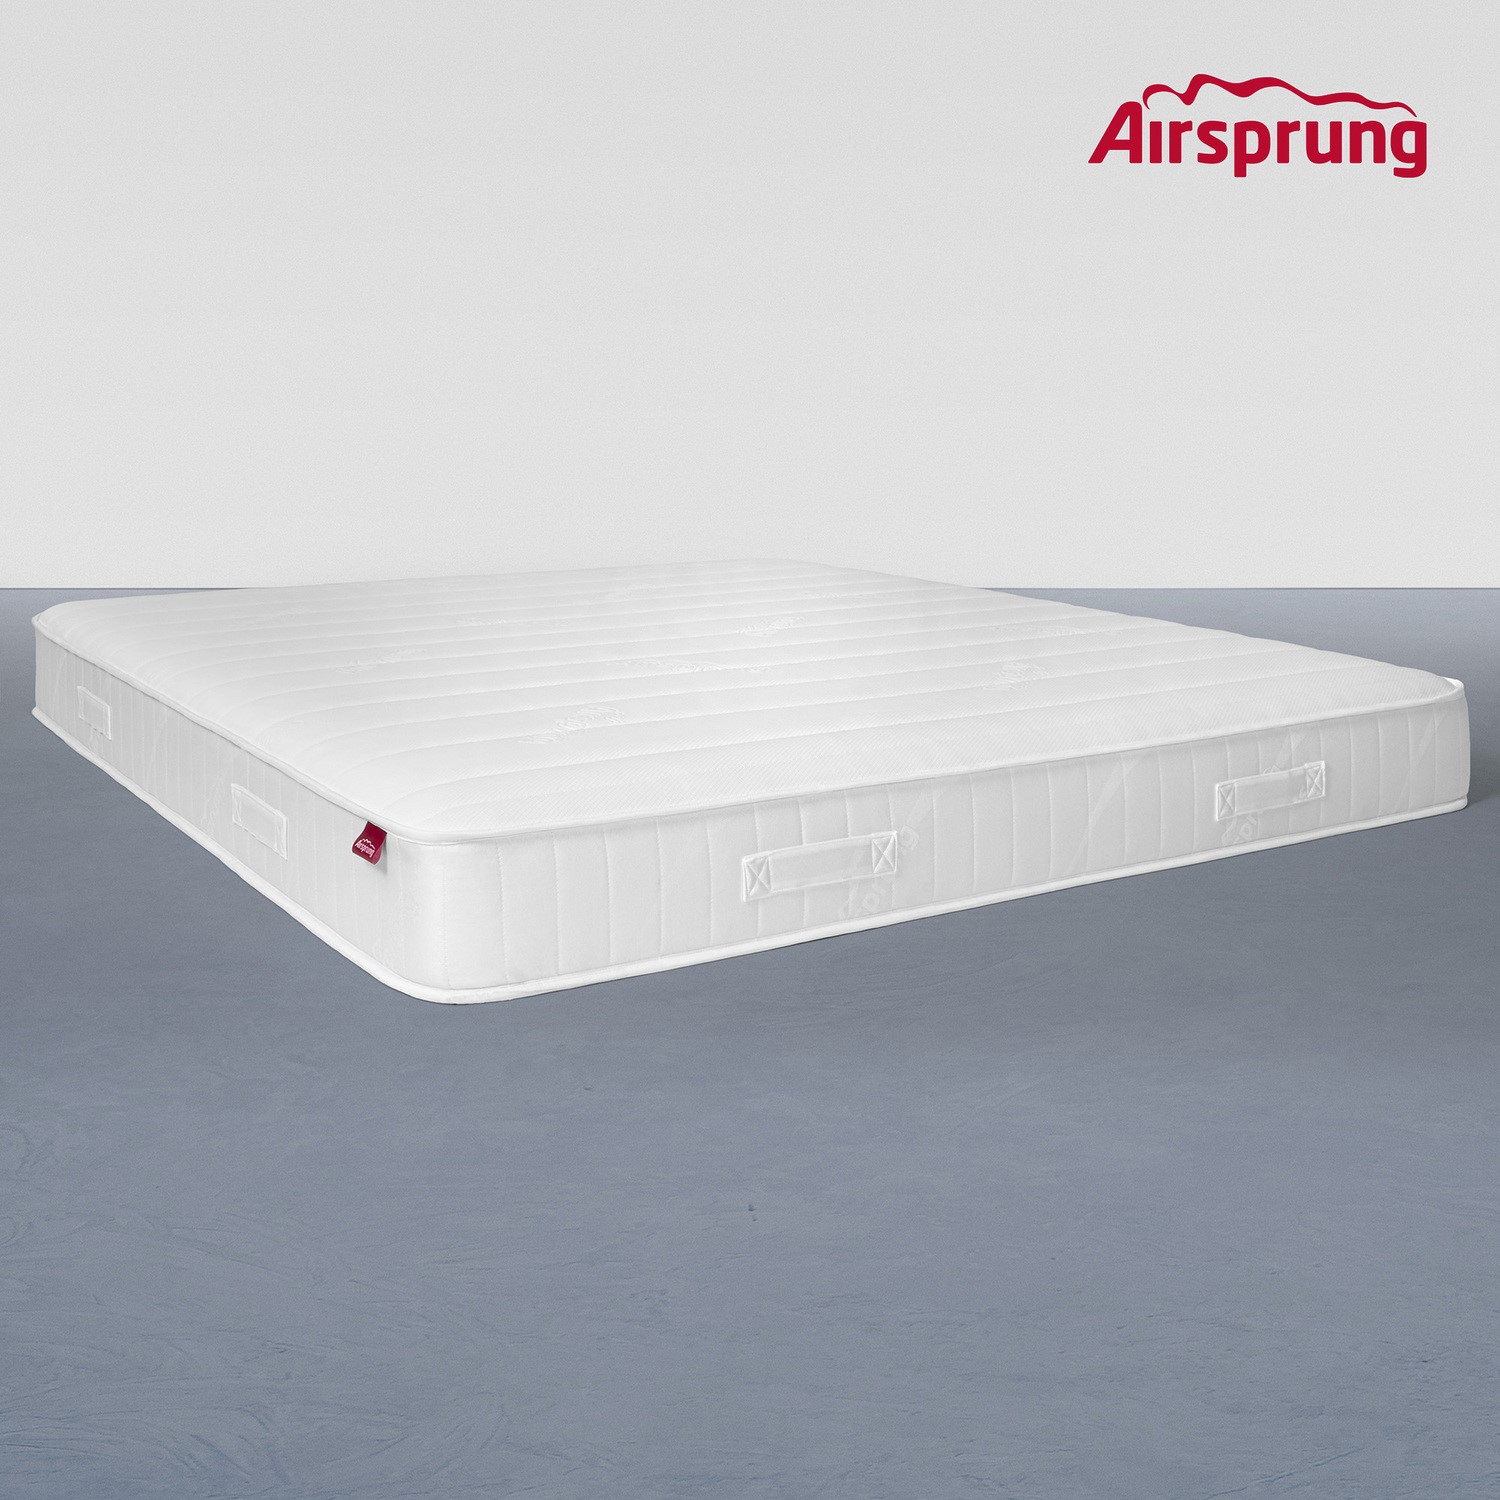 Read more about Super king 1000 pocket sprung rolled recycled fibre mattress airsprung